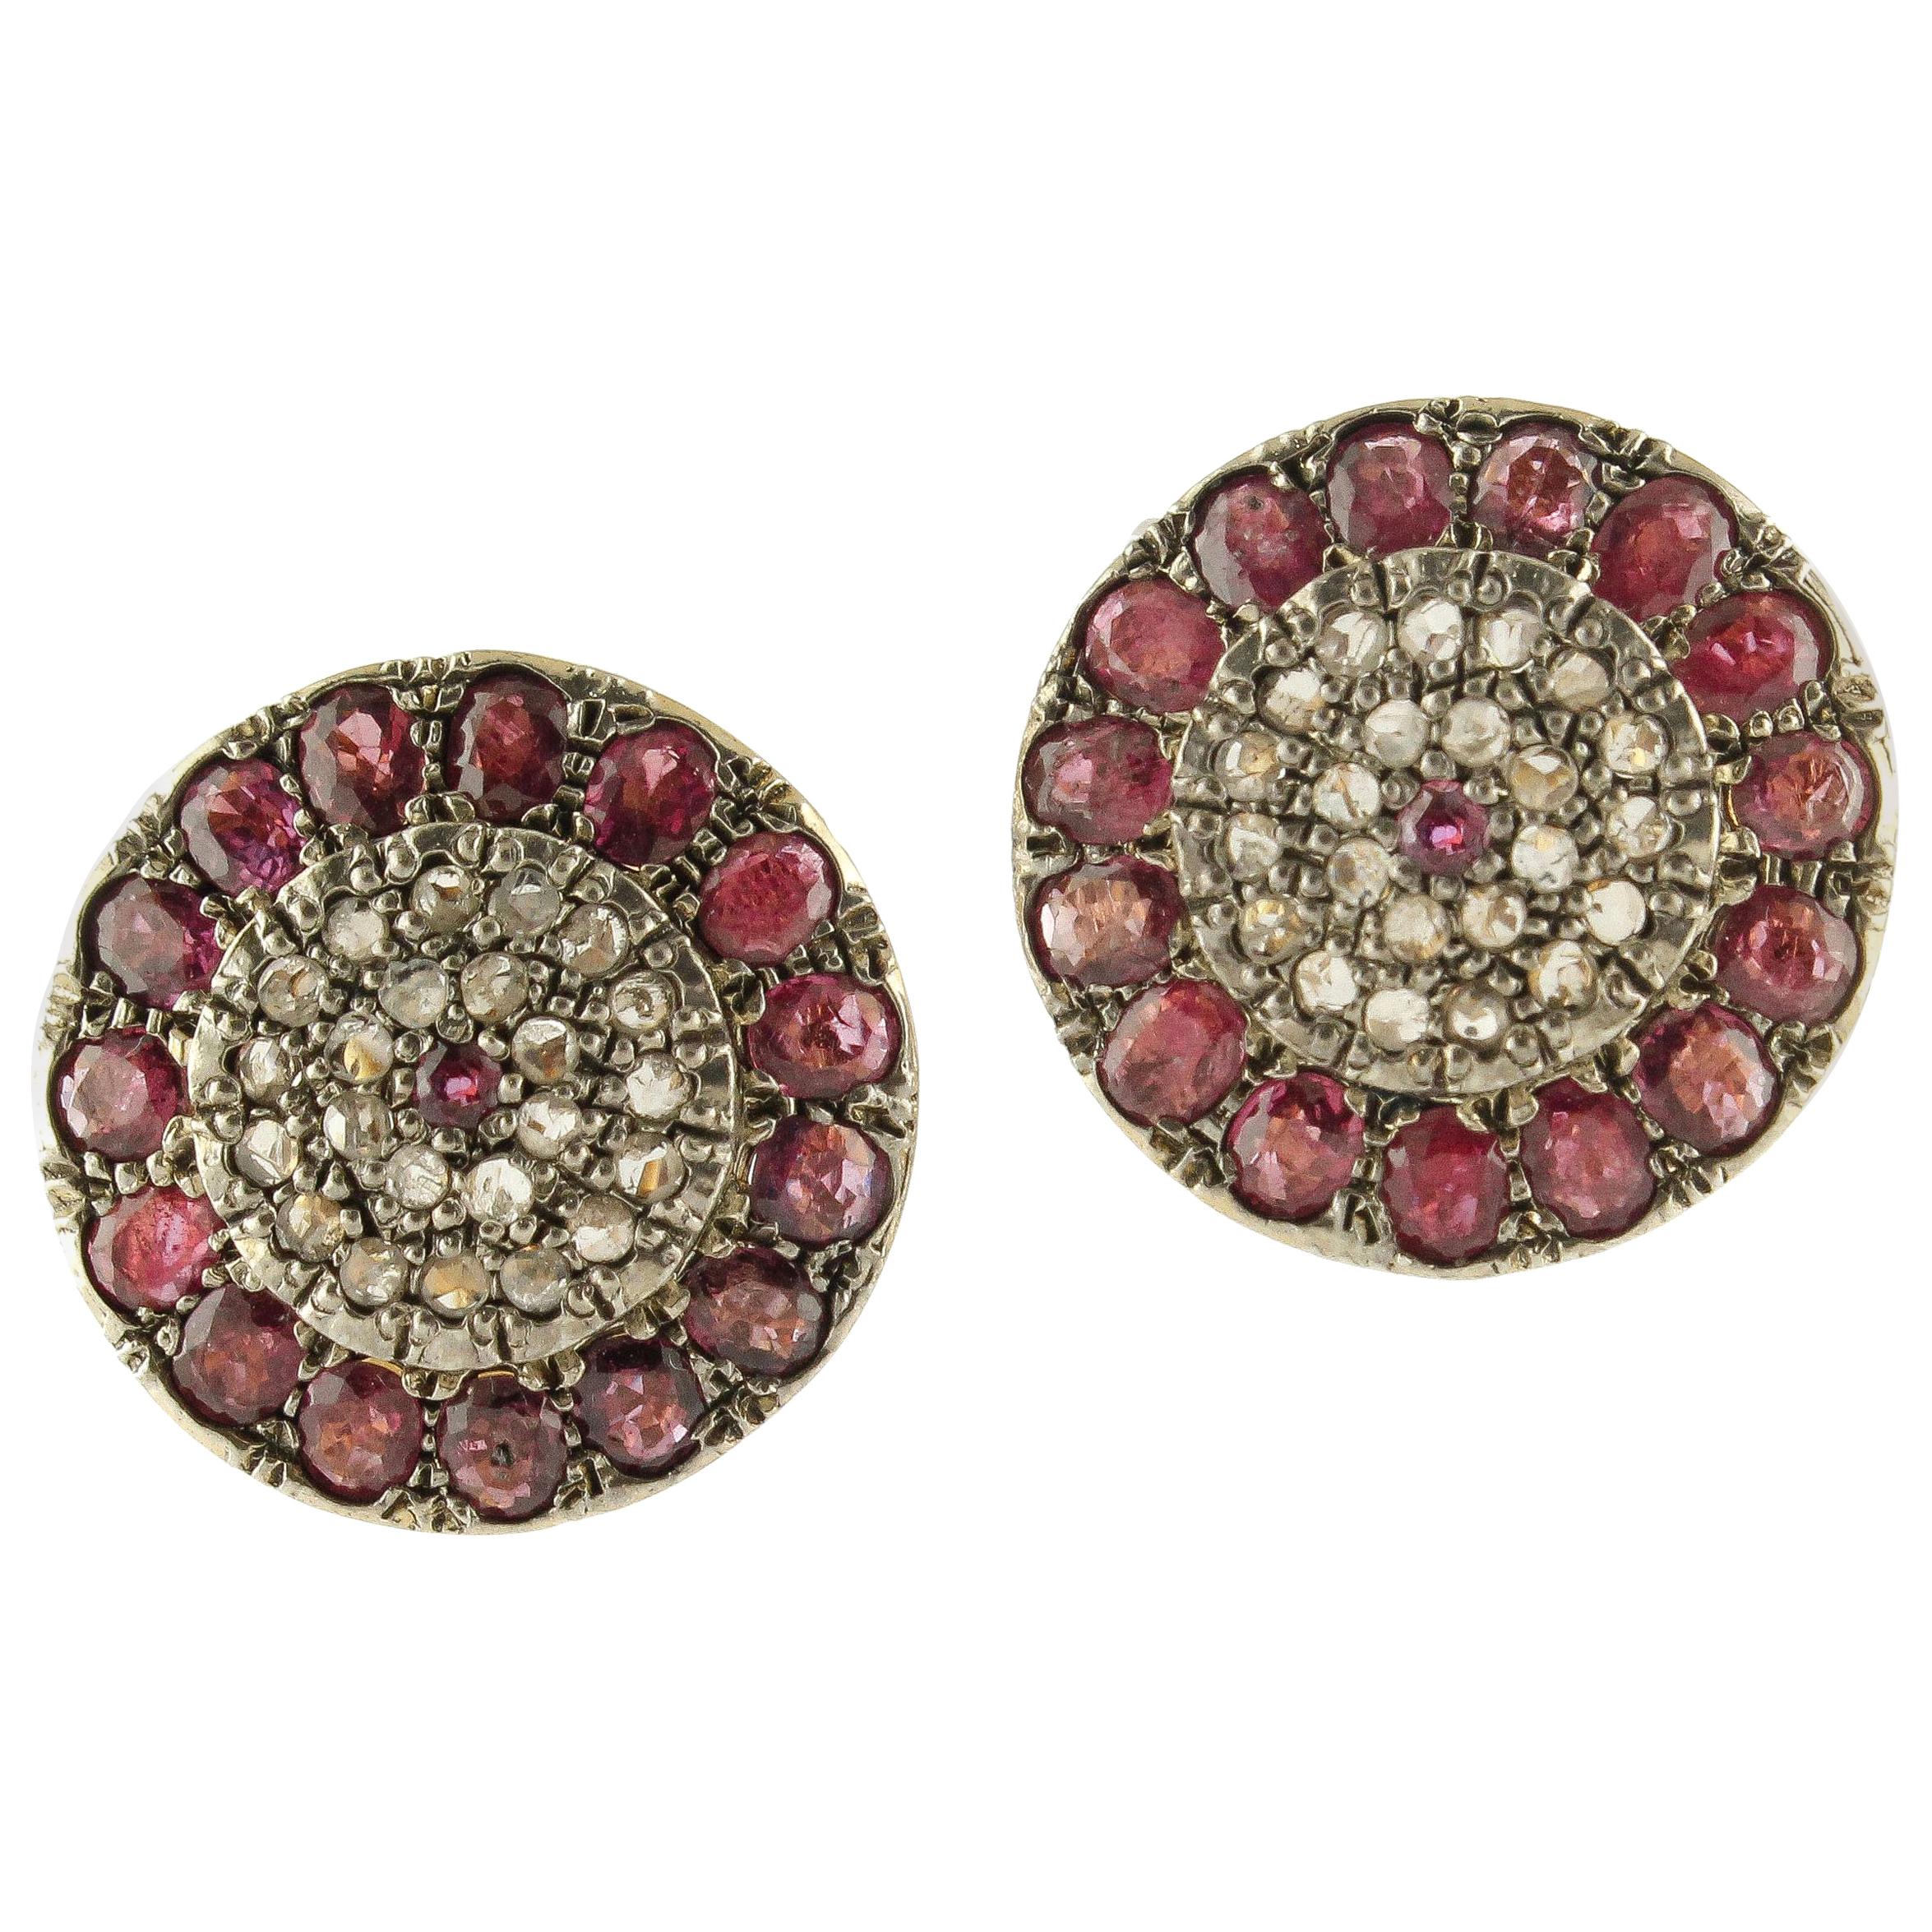 Rubies and Diamonds Rose Gold and Silver Clip-on Earrings